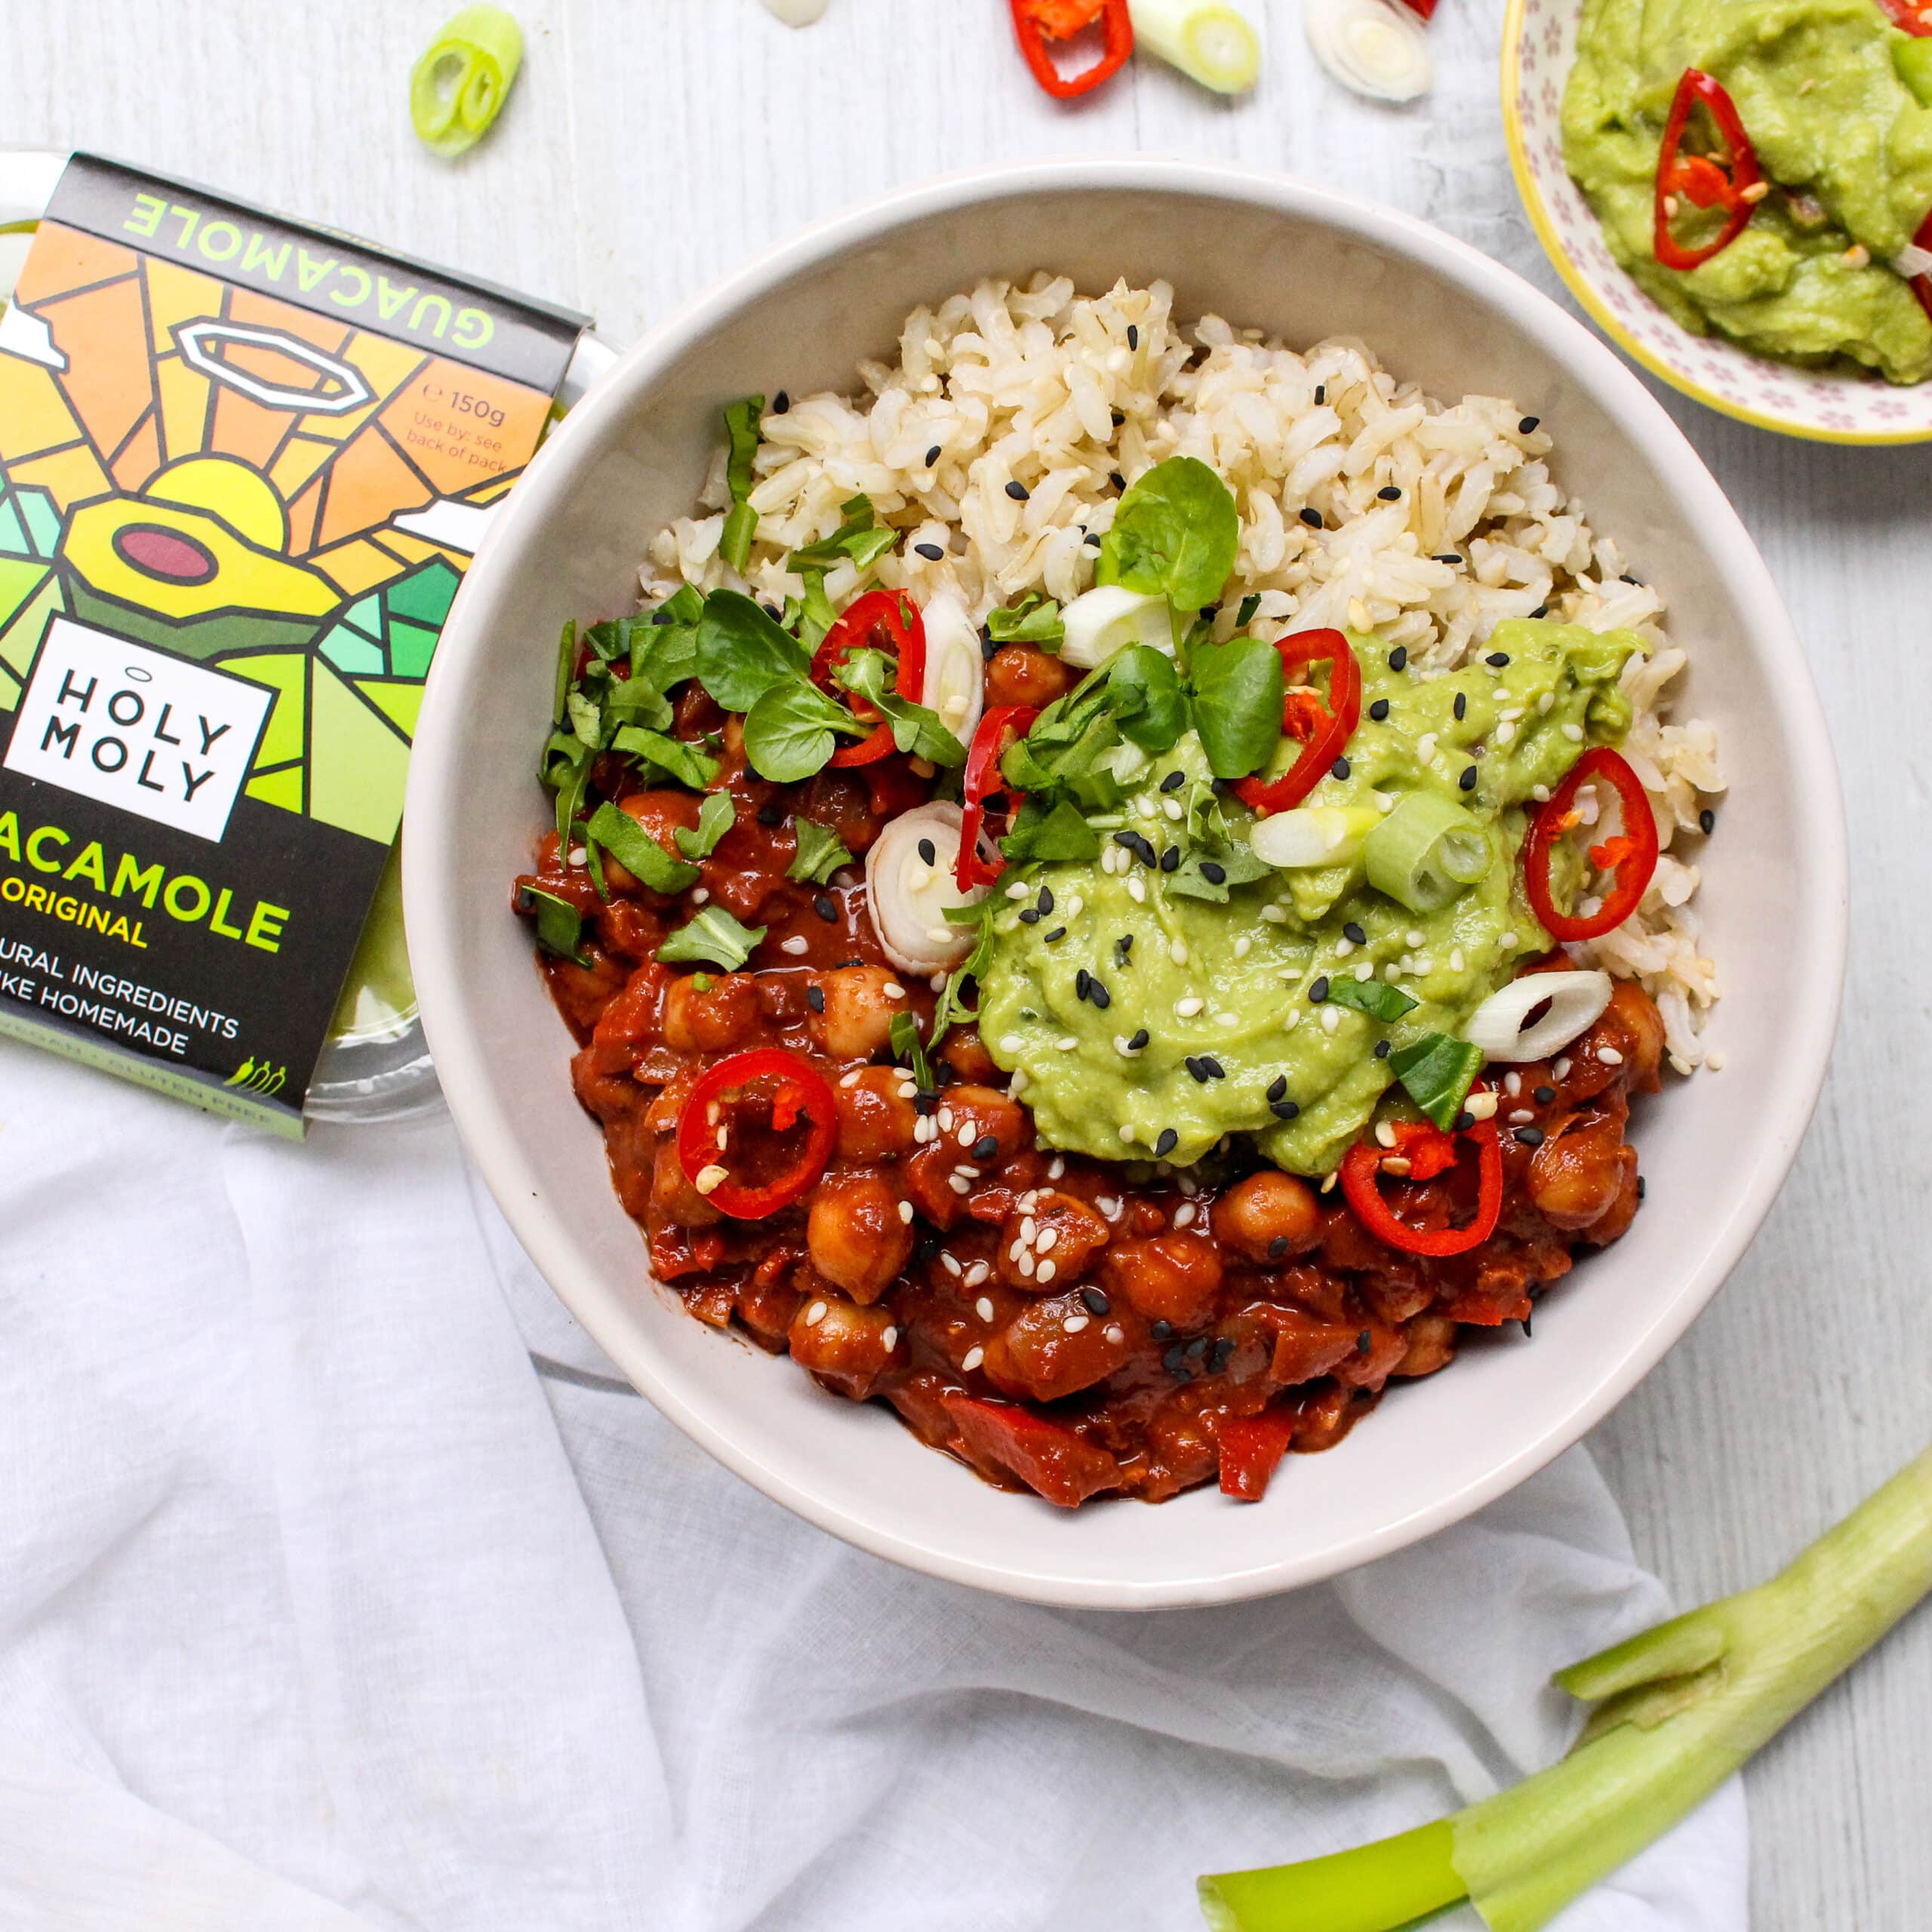 Chickpea Chilli with Holy Moly Guacamole